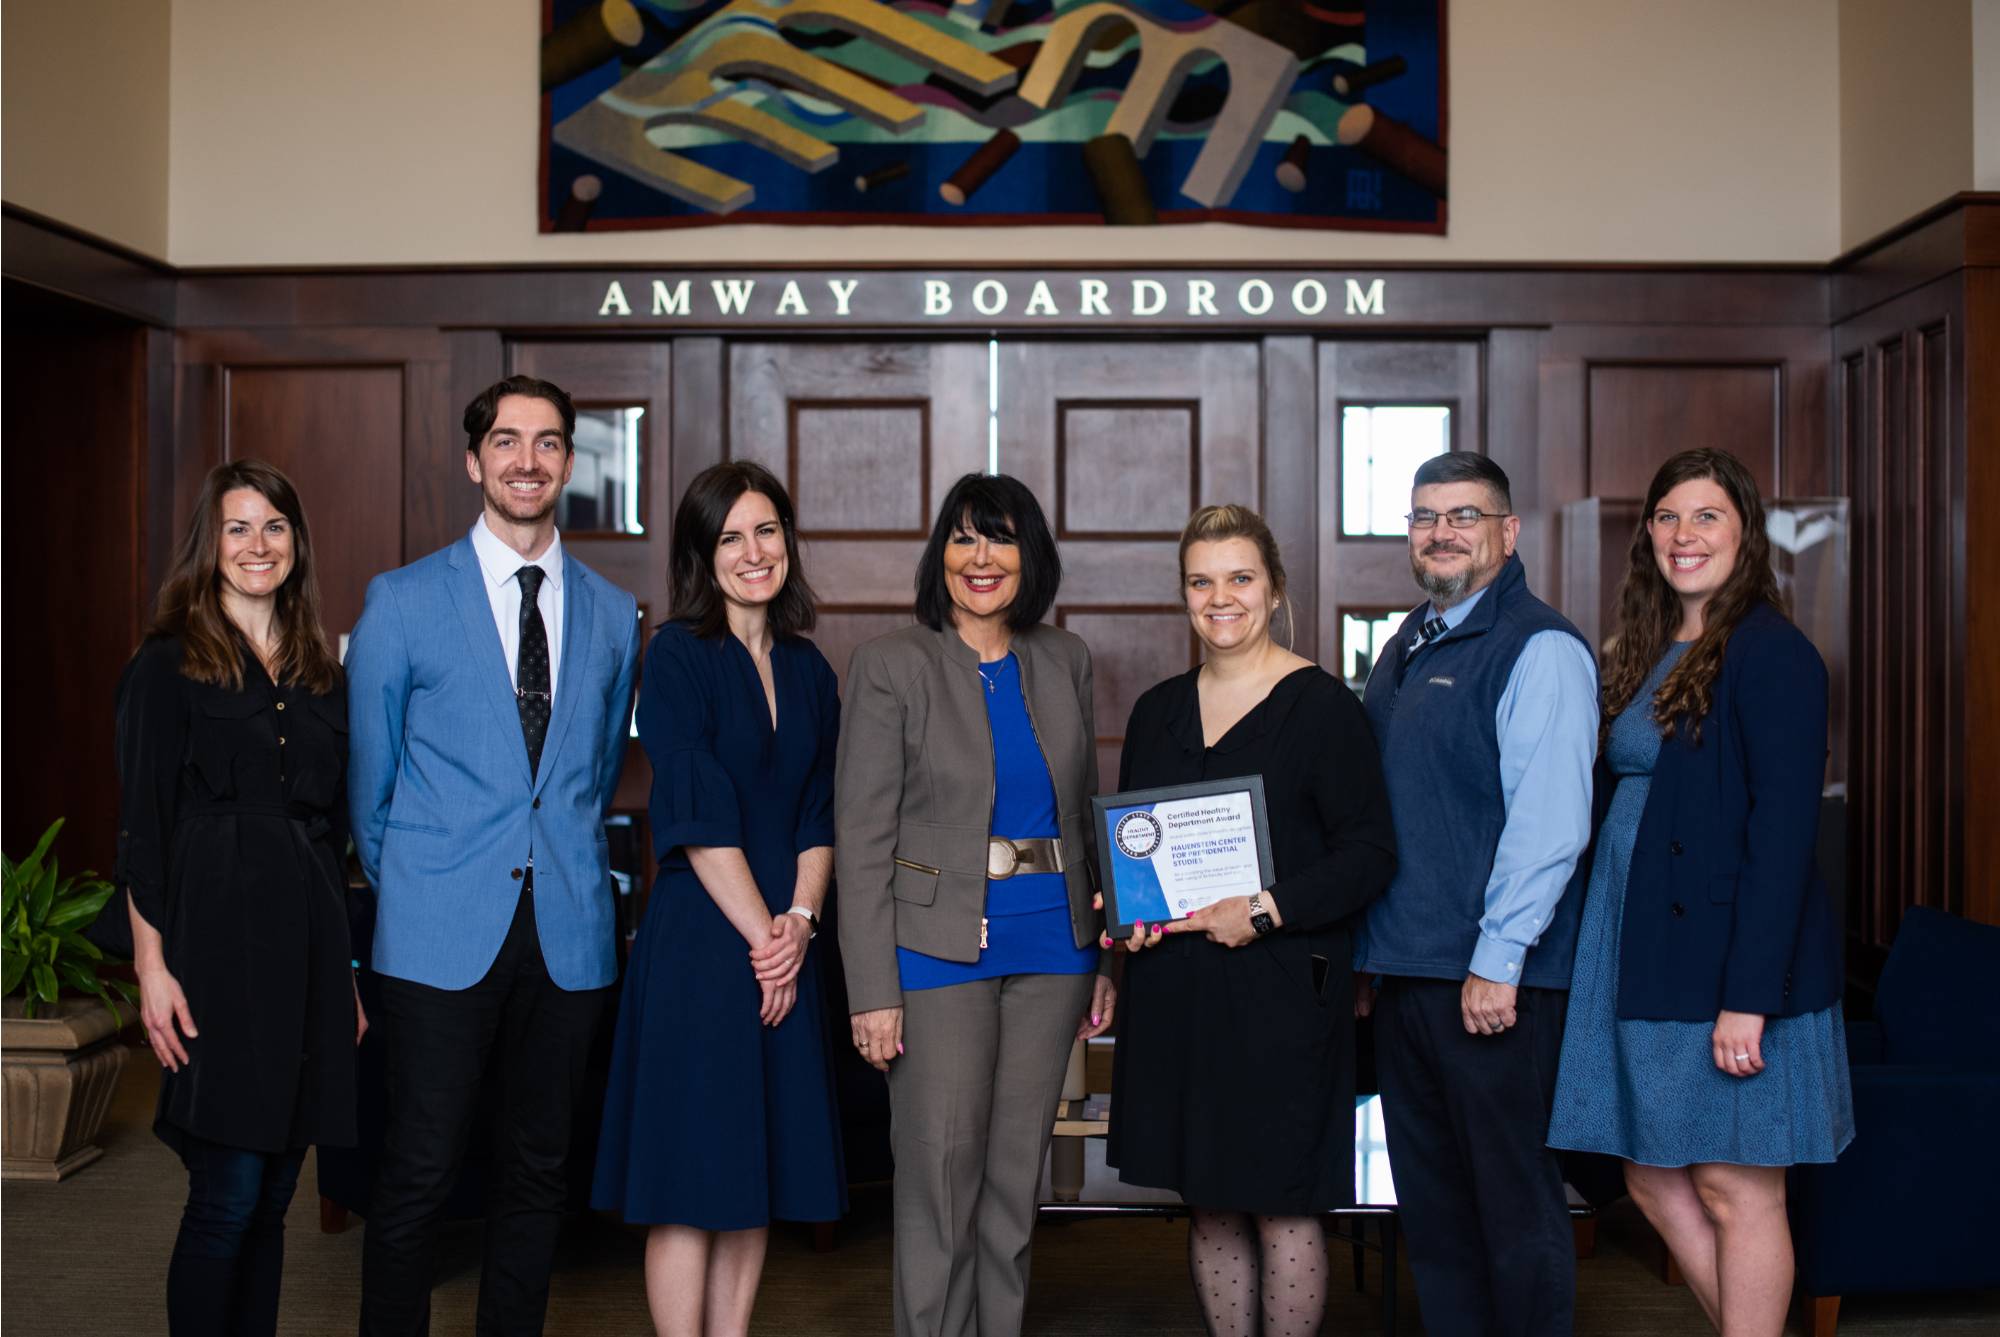 The Hauenstein Center for Presidential Studies team smiling and standing together with President Mantella, holding their certificate for becoming a Certified Healthy Department